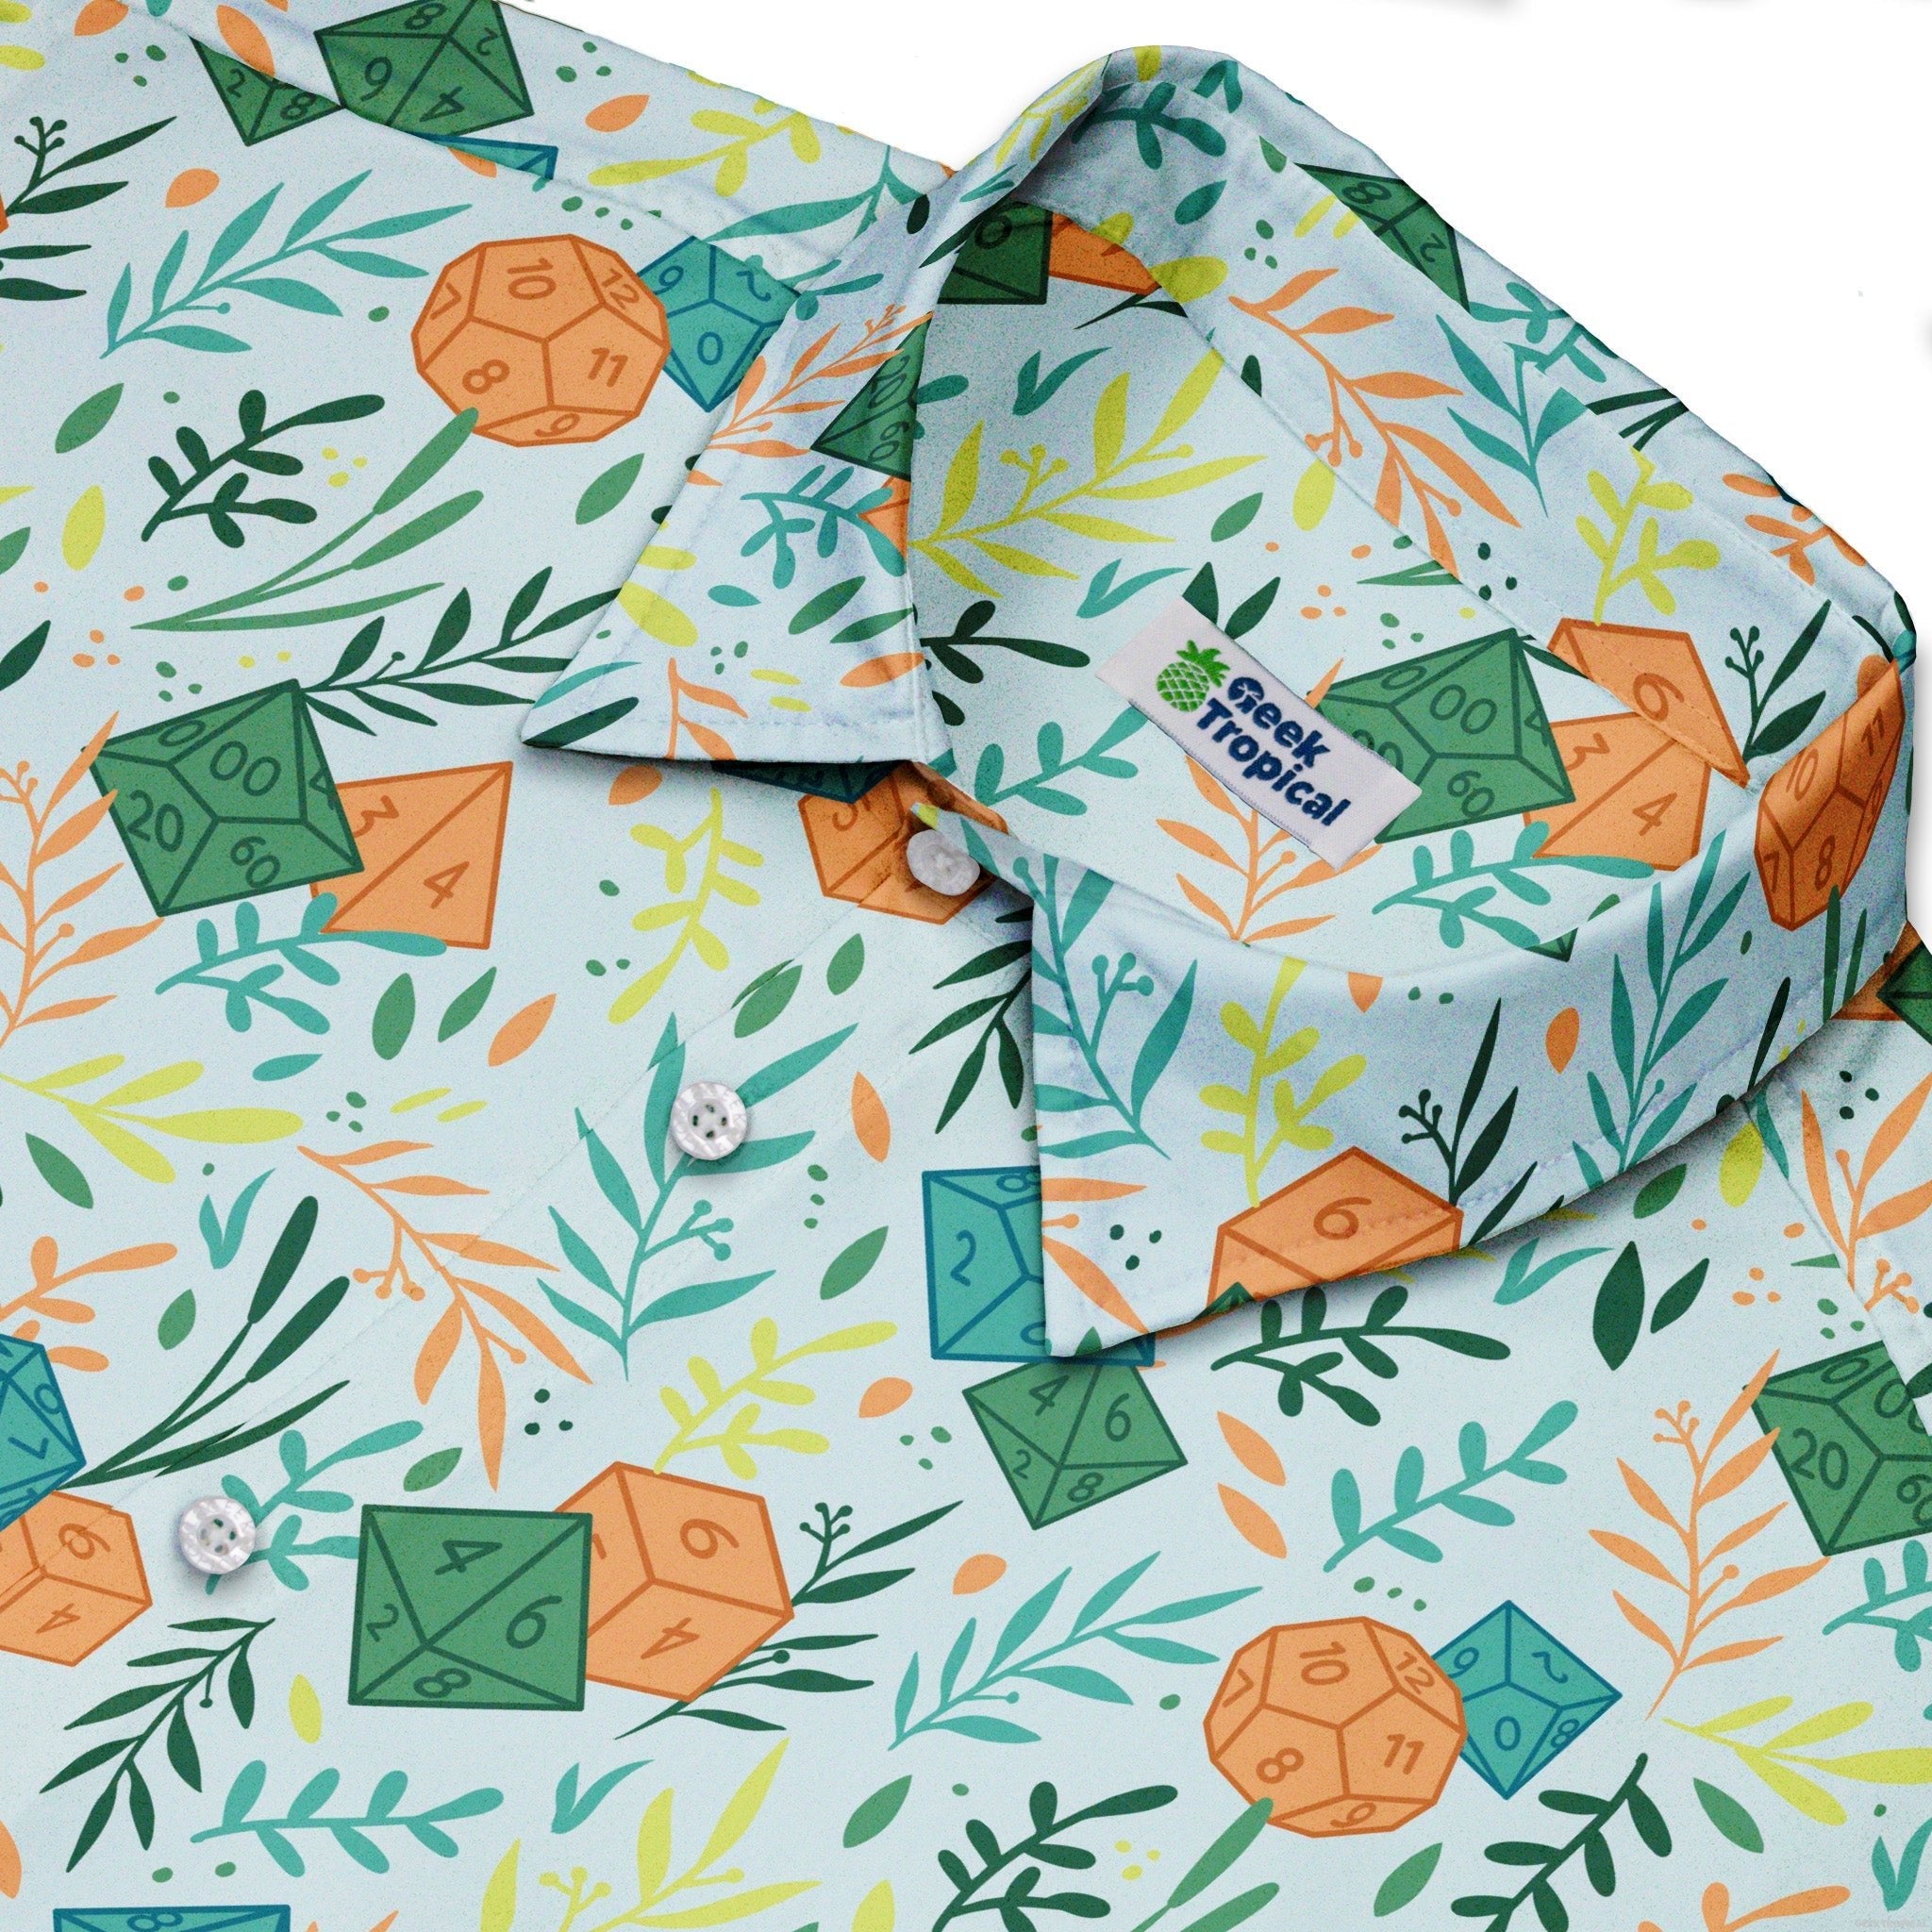 Dnd Dice Plants Button Up Shirt - adult sizing - dnd & rpg print - Simple Patterns